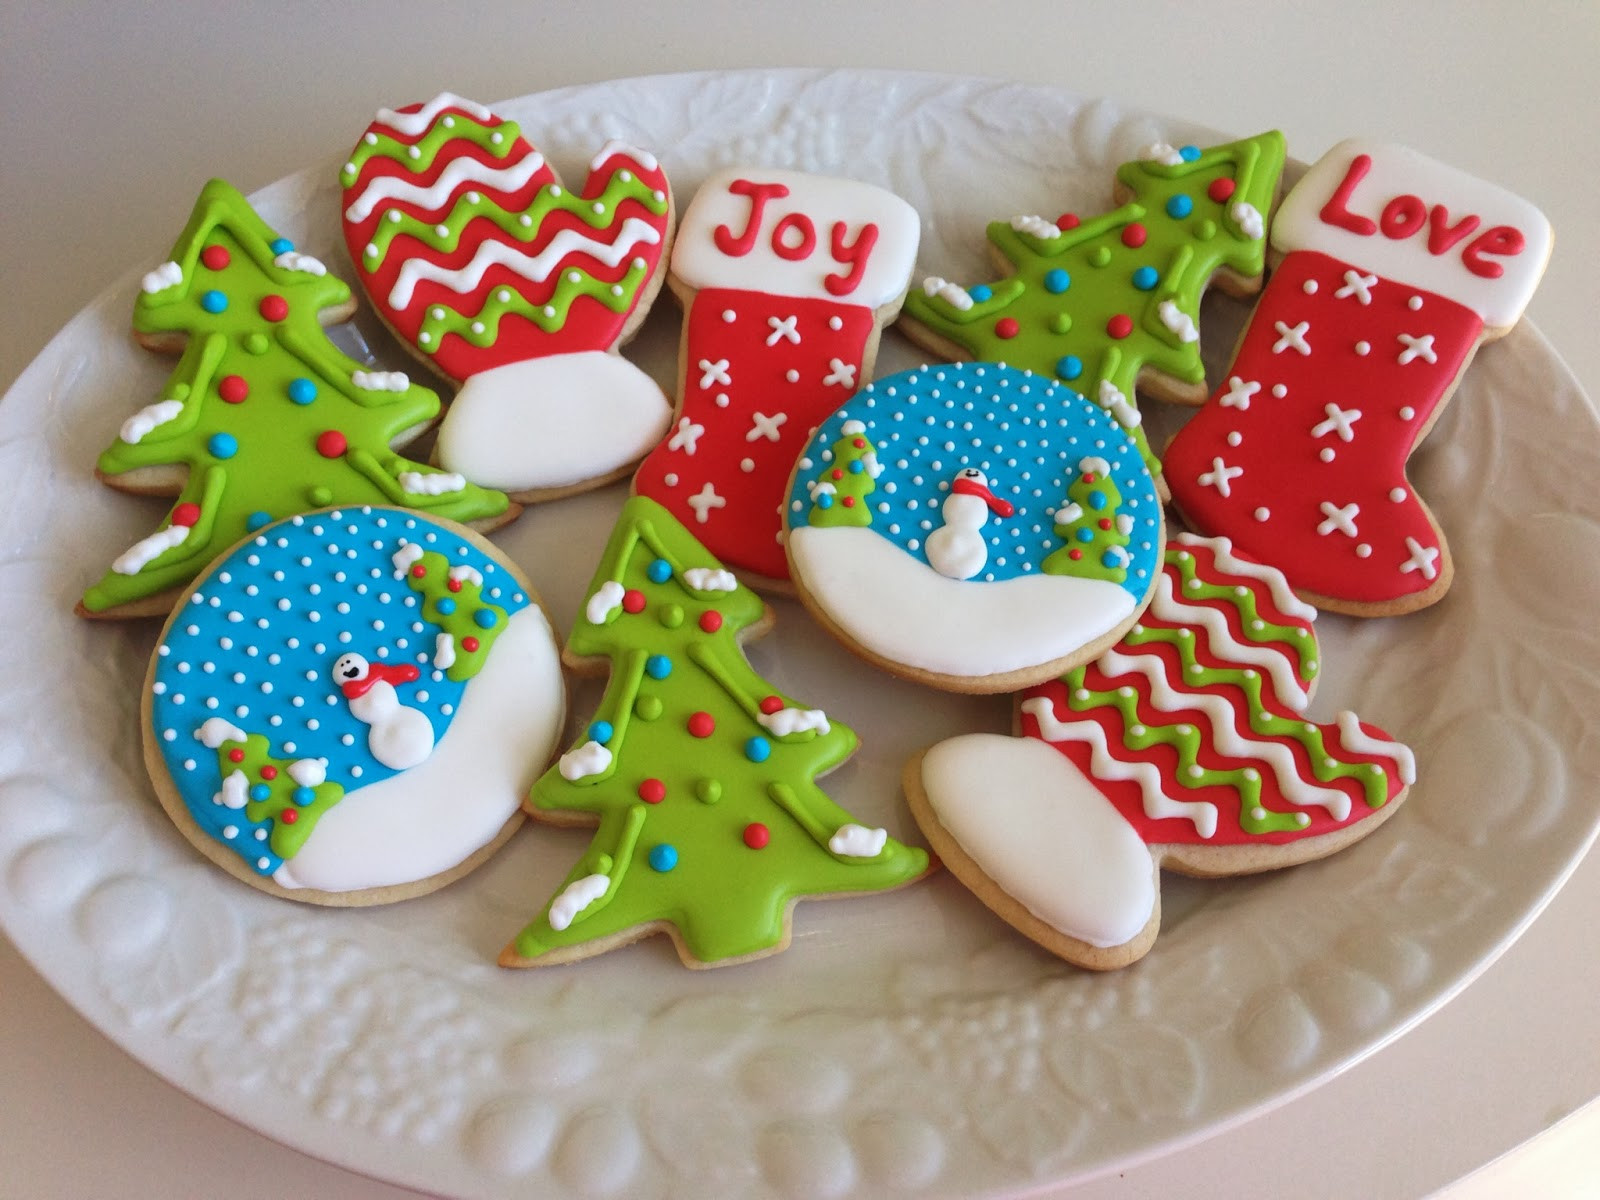 Iced Christmas Cookies
 monograms & cake Christmas Cut Out Sugar Cookies with